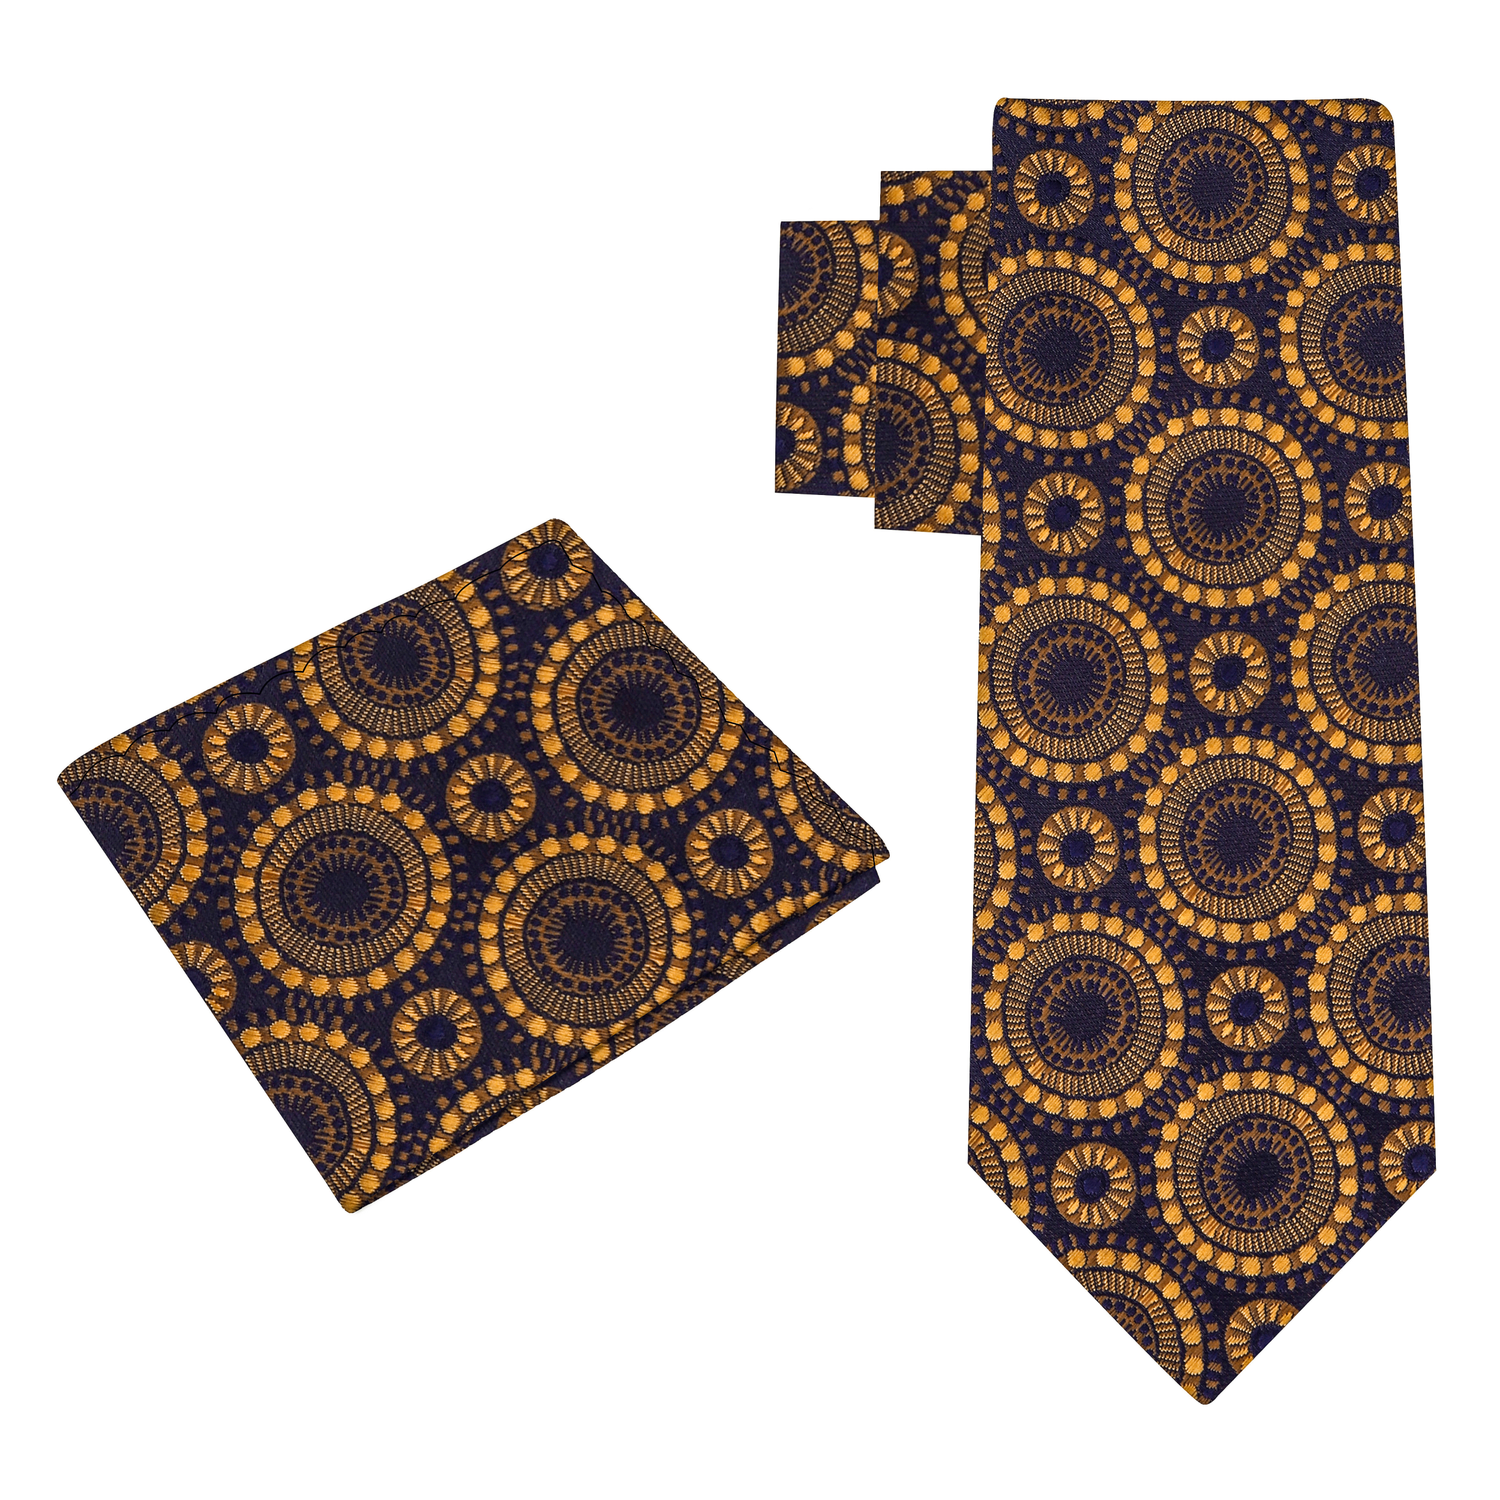 View 2: Gold and Brown Circles Tie and Square